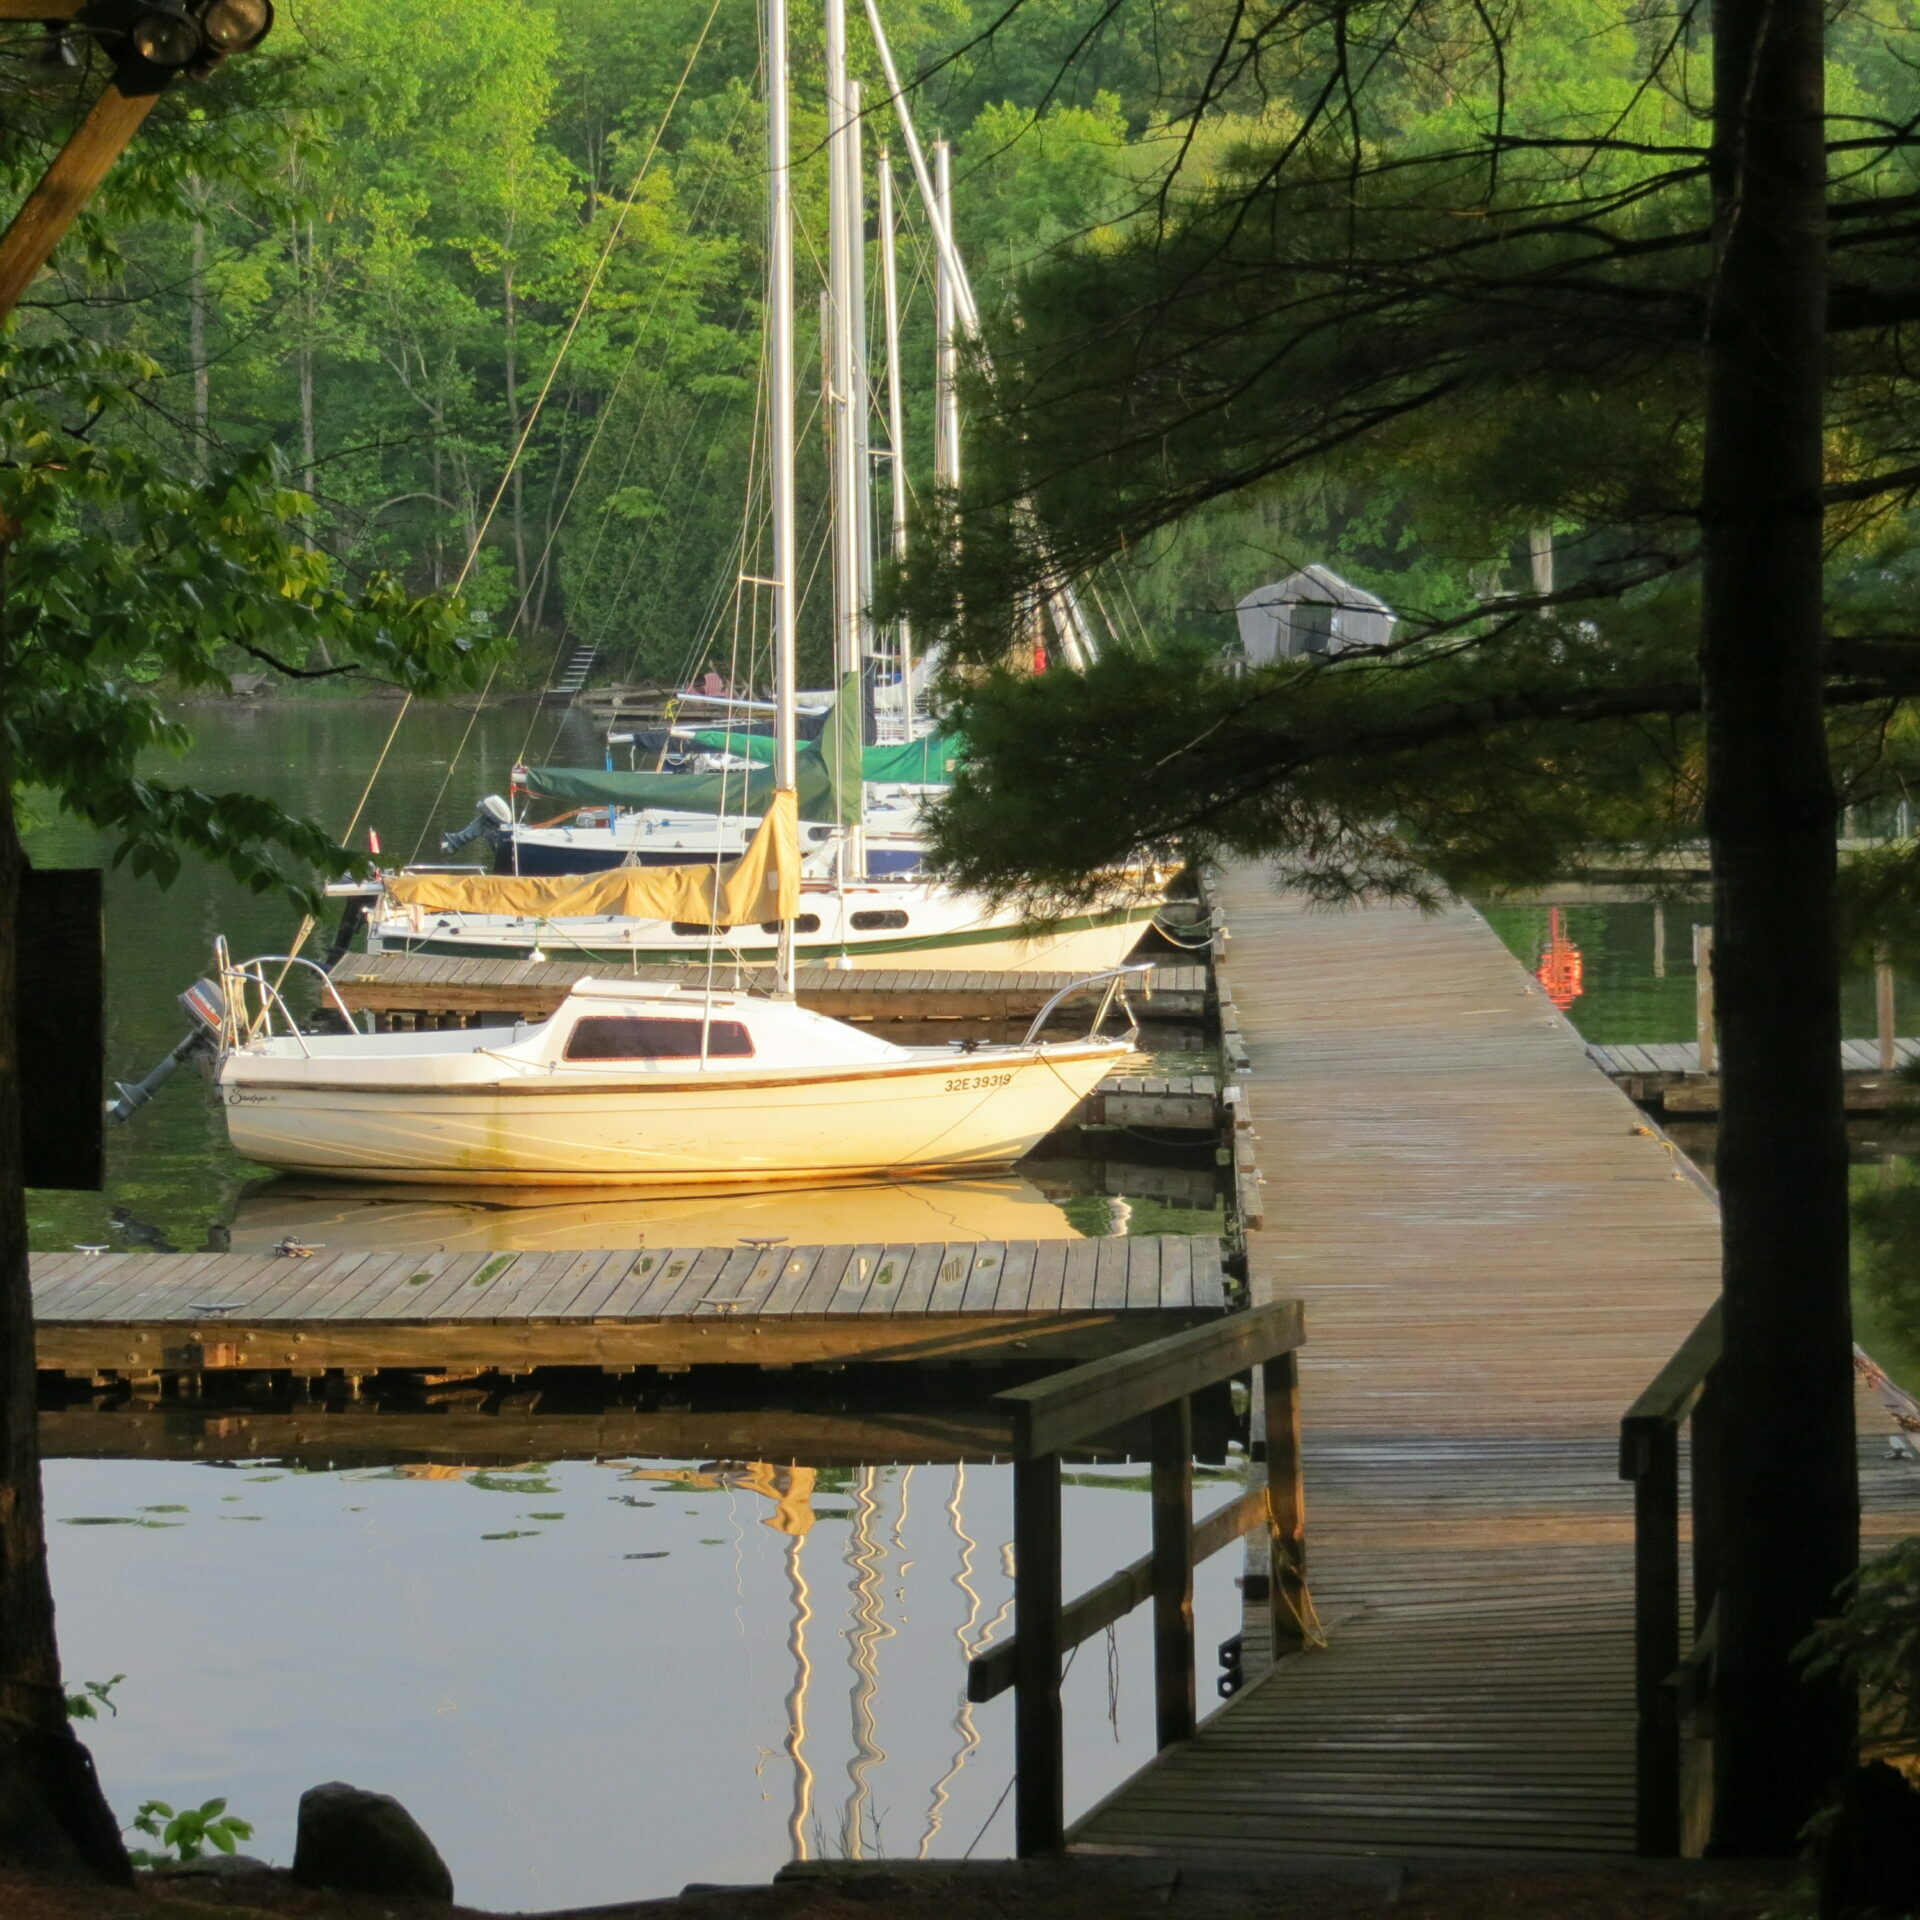 This is a photograph of a sandpiper sailboat along a dock at dusk